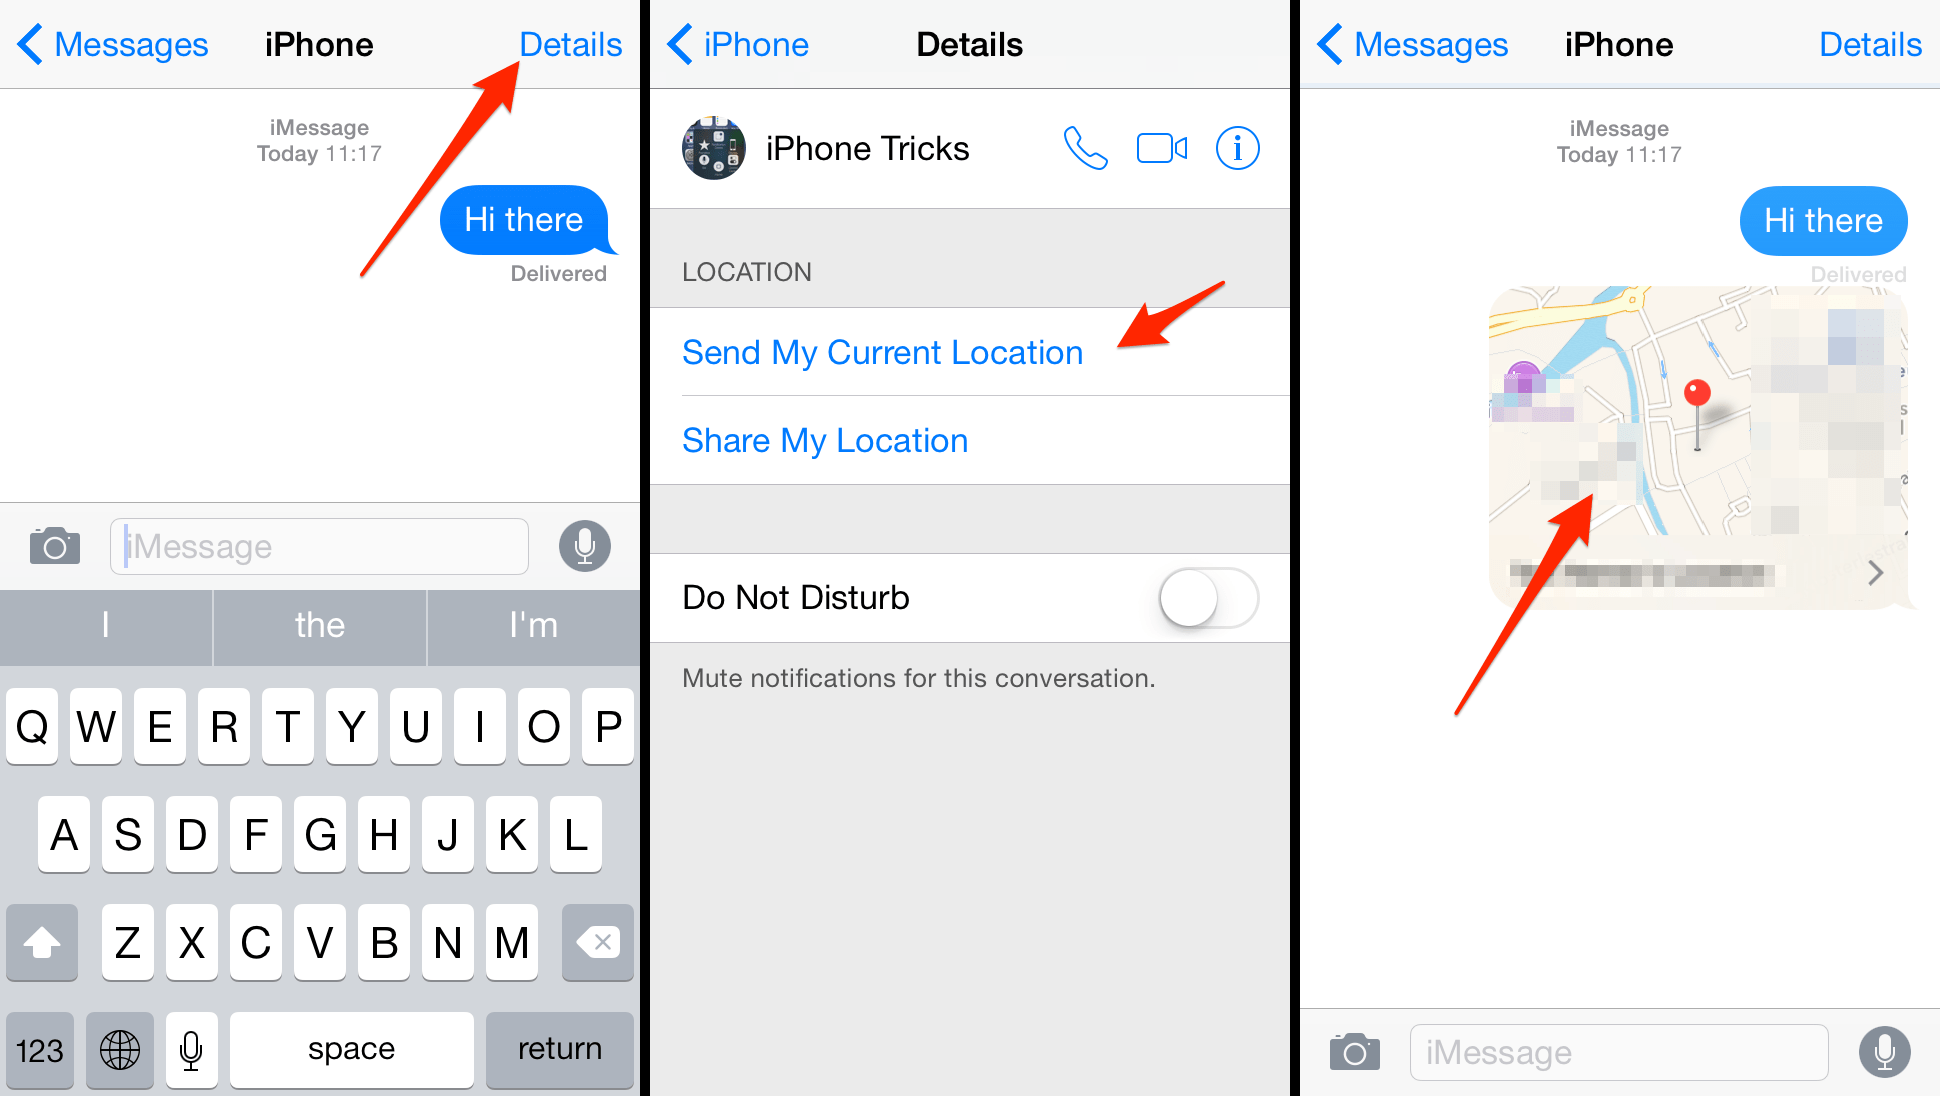 How To Share Your Location in iMessage on iPhone